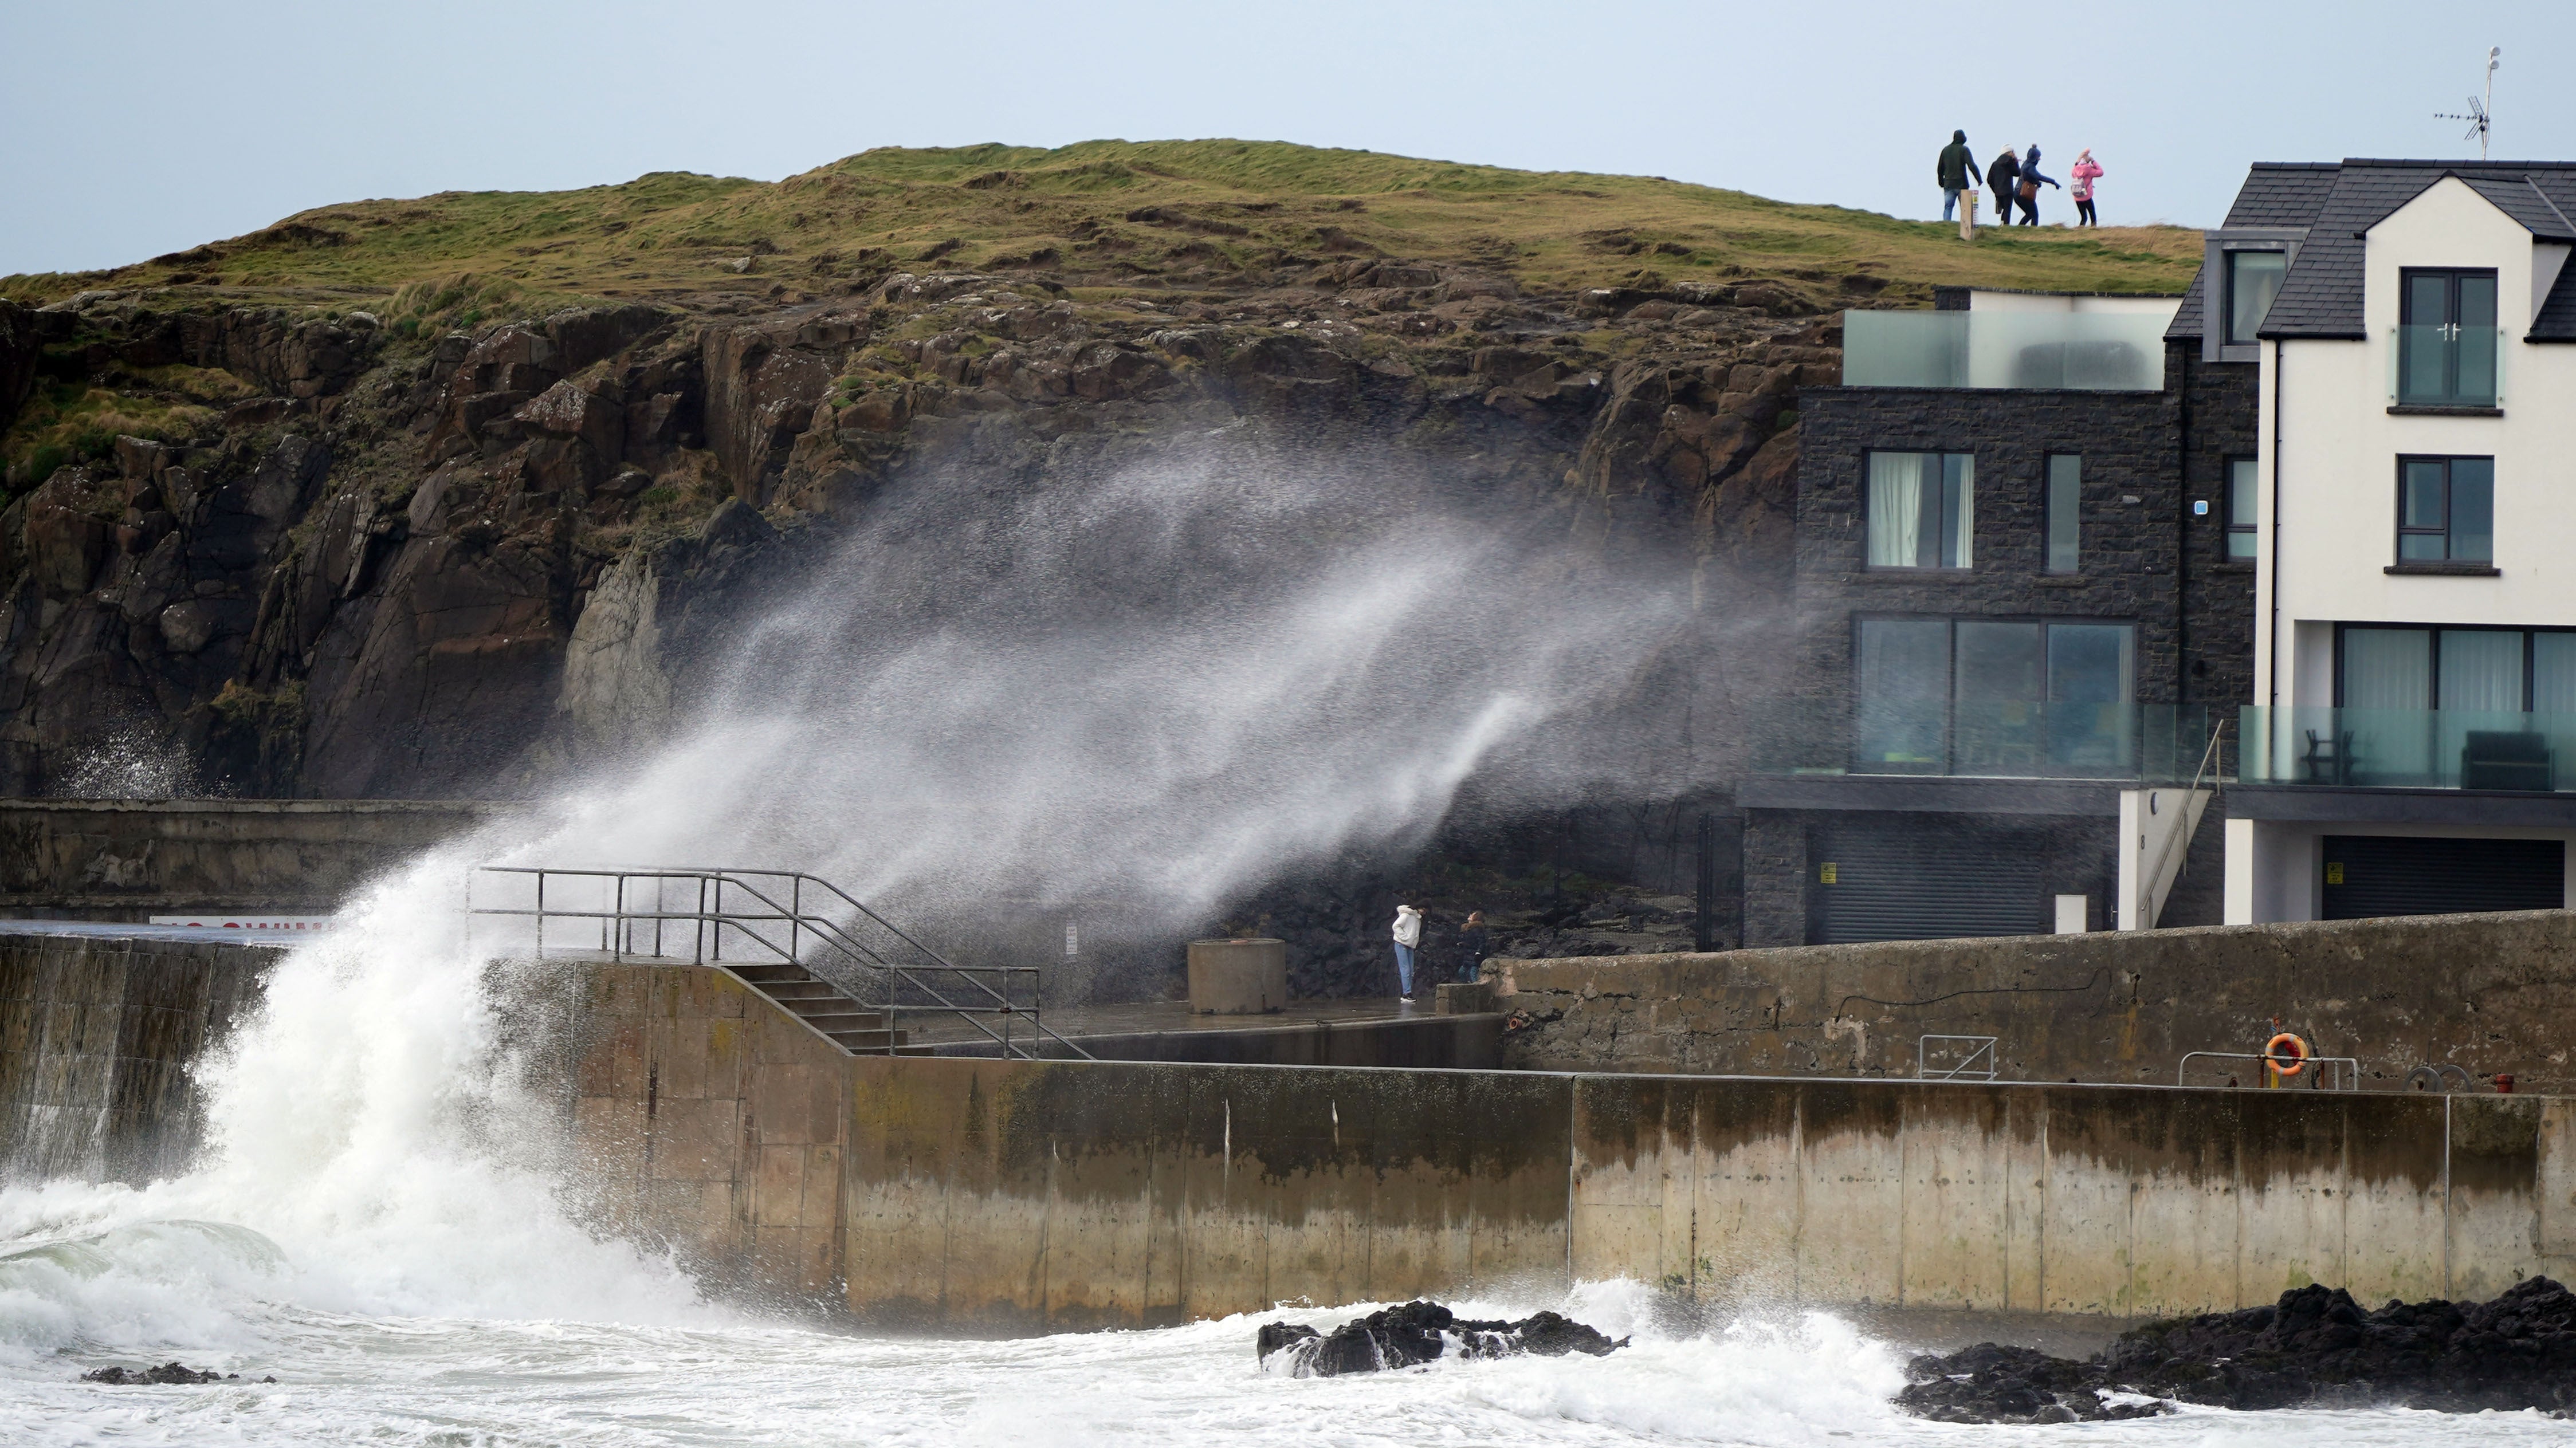 Big waves hit the sea wall at Portstewart in Co Londonderry, Northern Ireland (Niall Carson/PA)